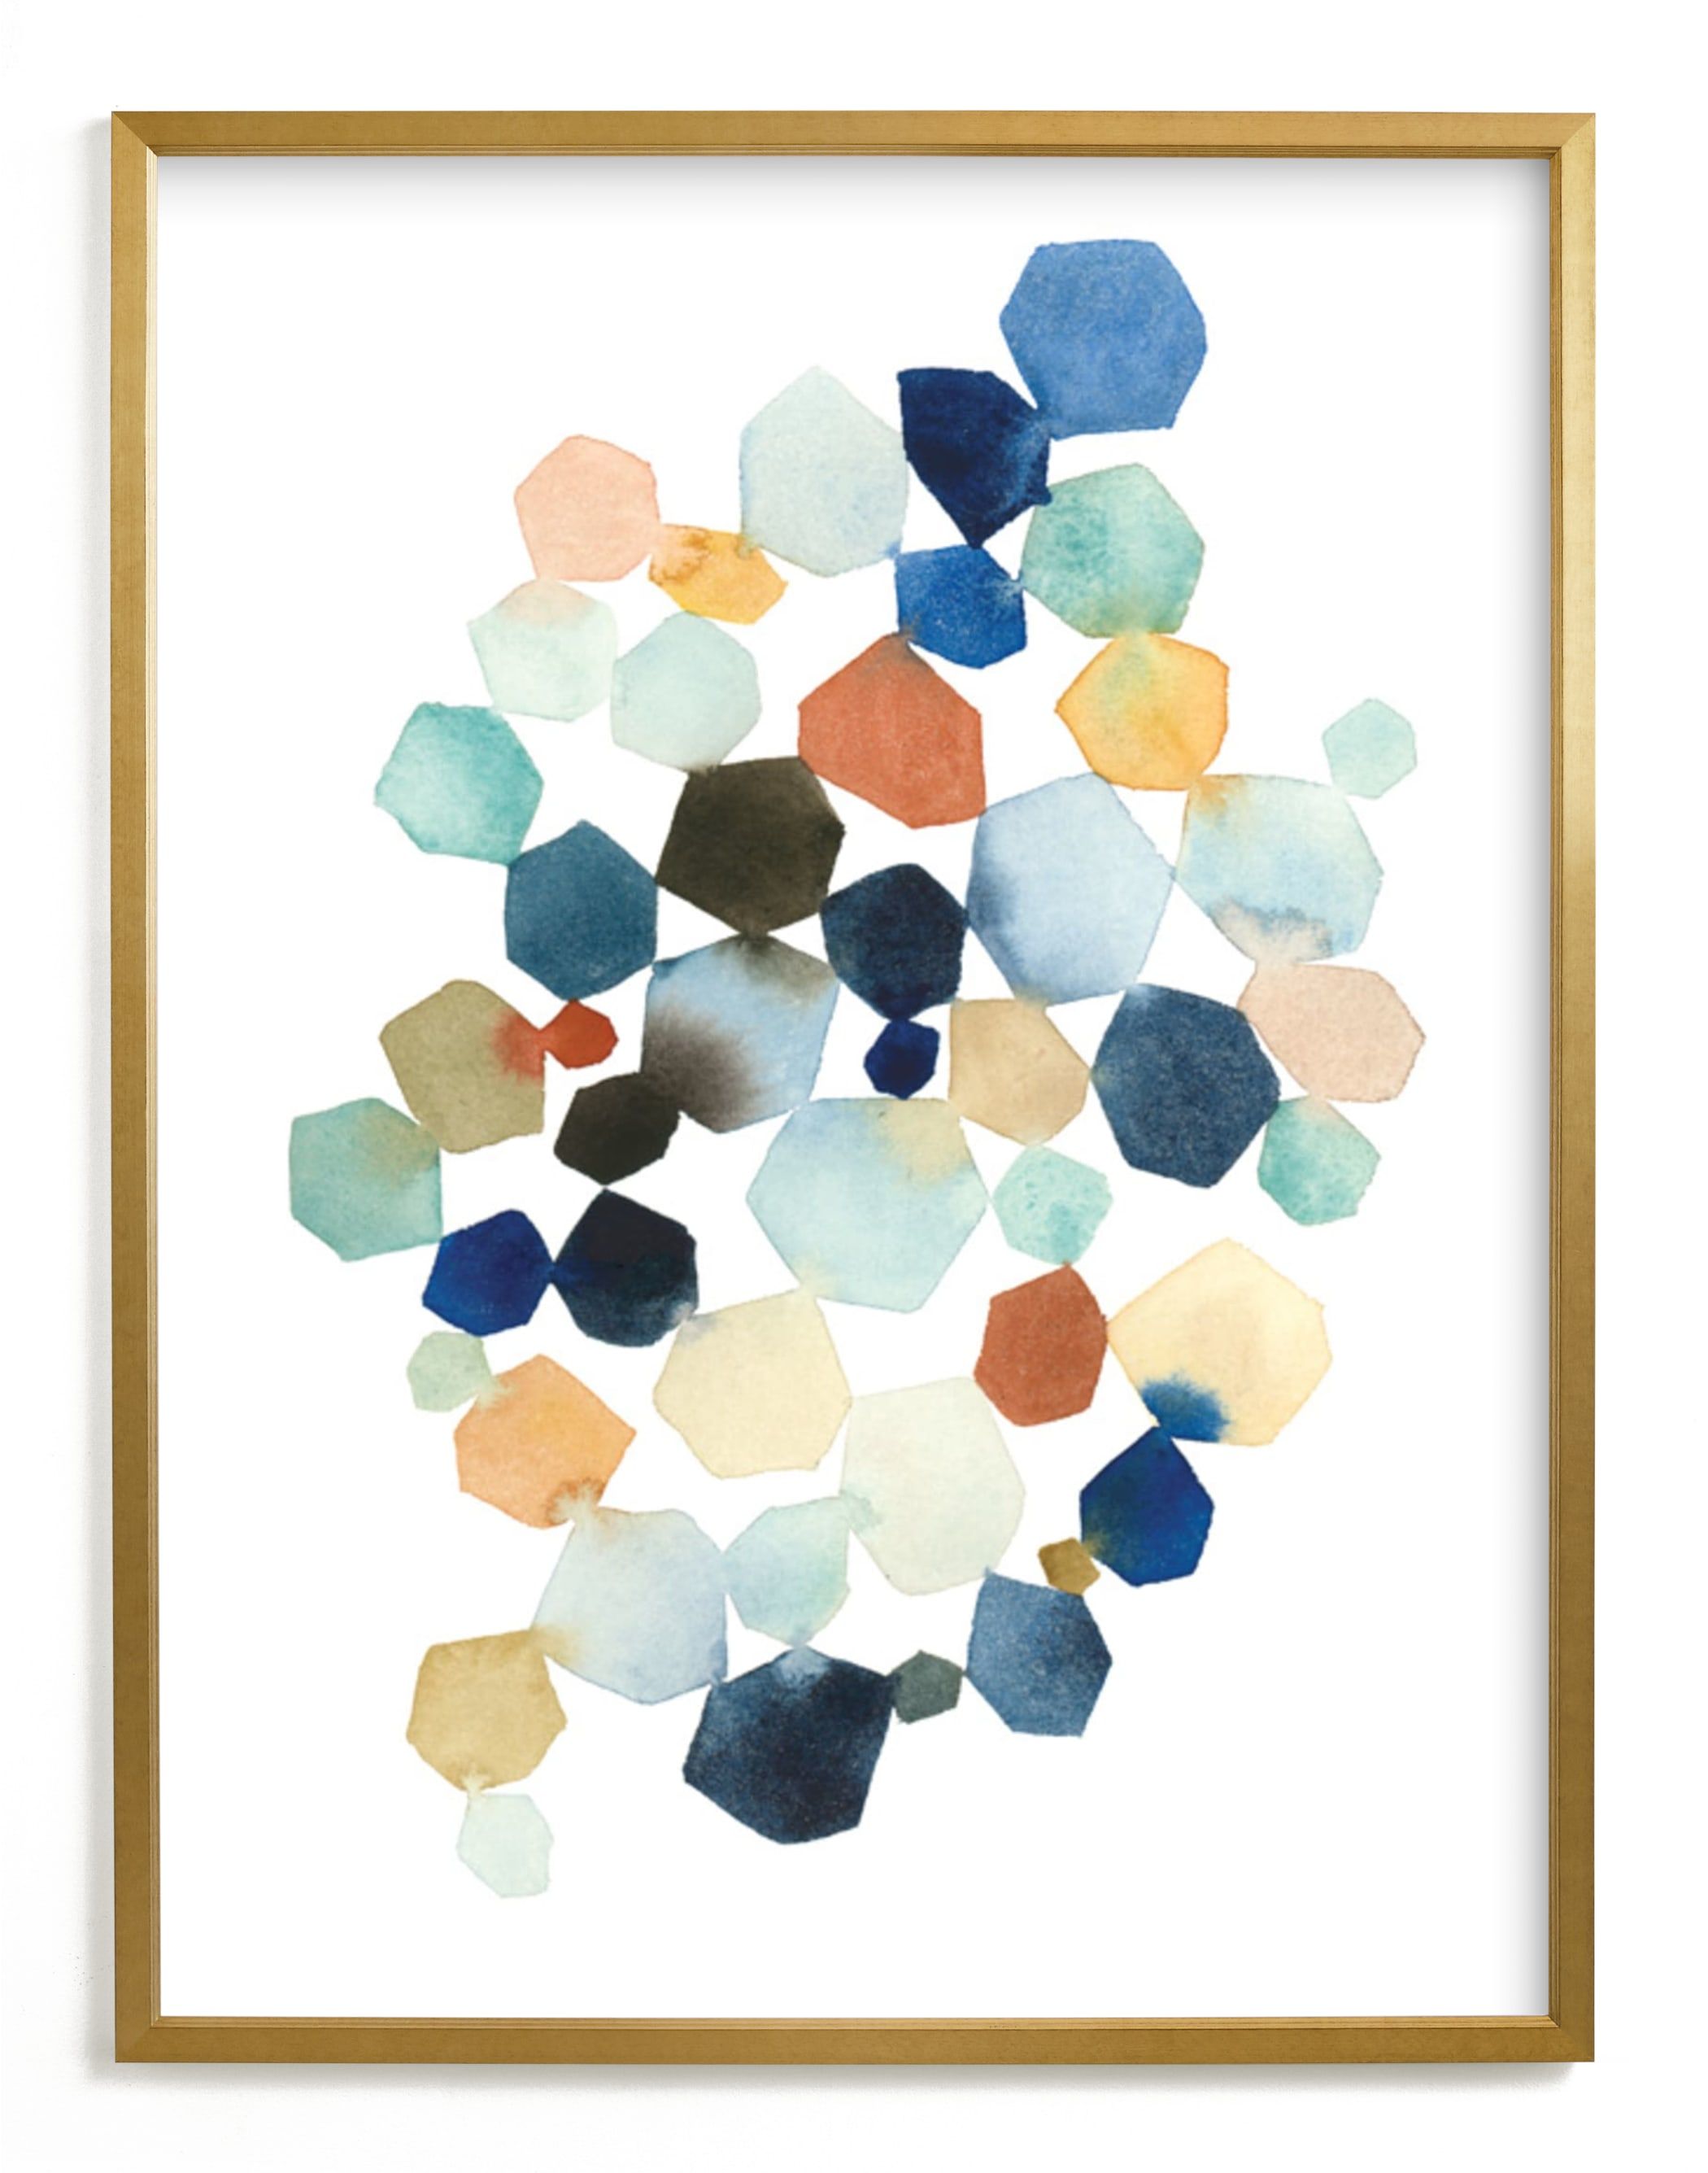 "Hexagon Cluster" - Painting Limited Edition Art Print by Yao Cheng Design. | Minted